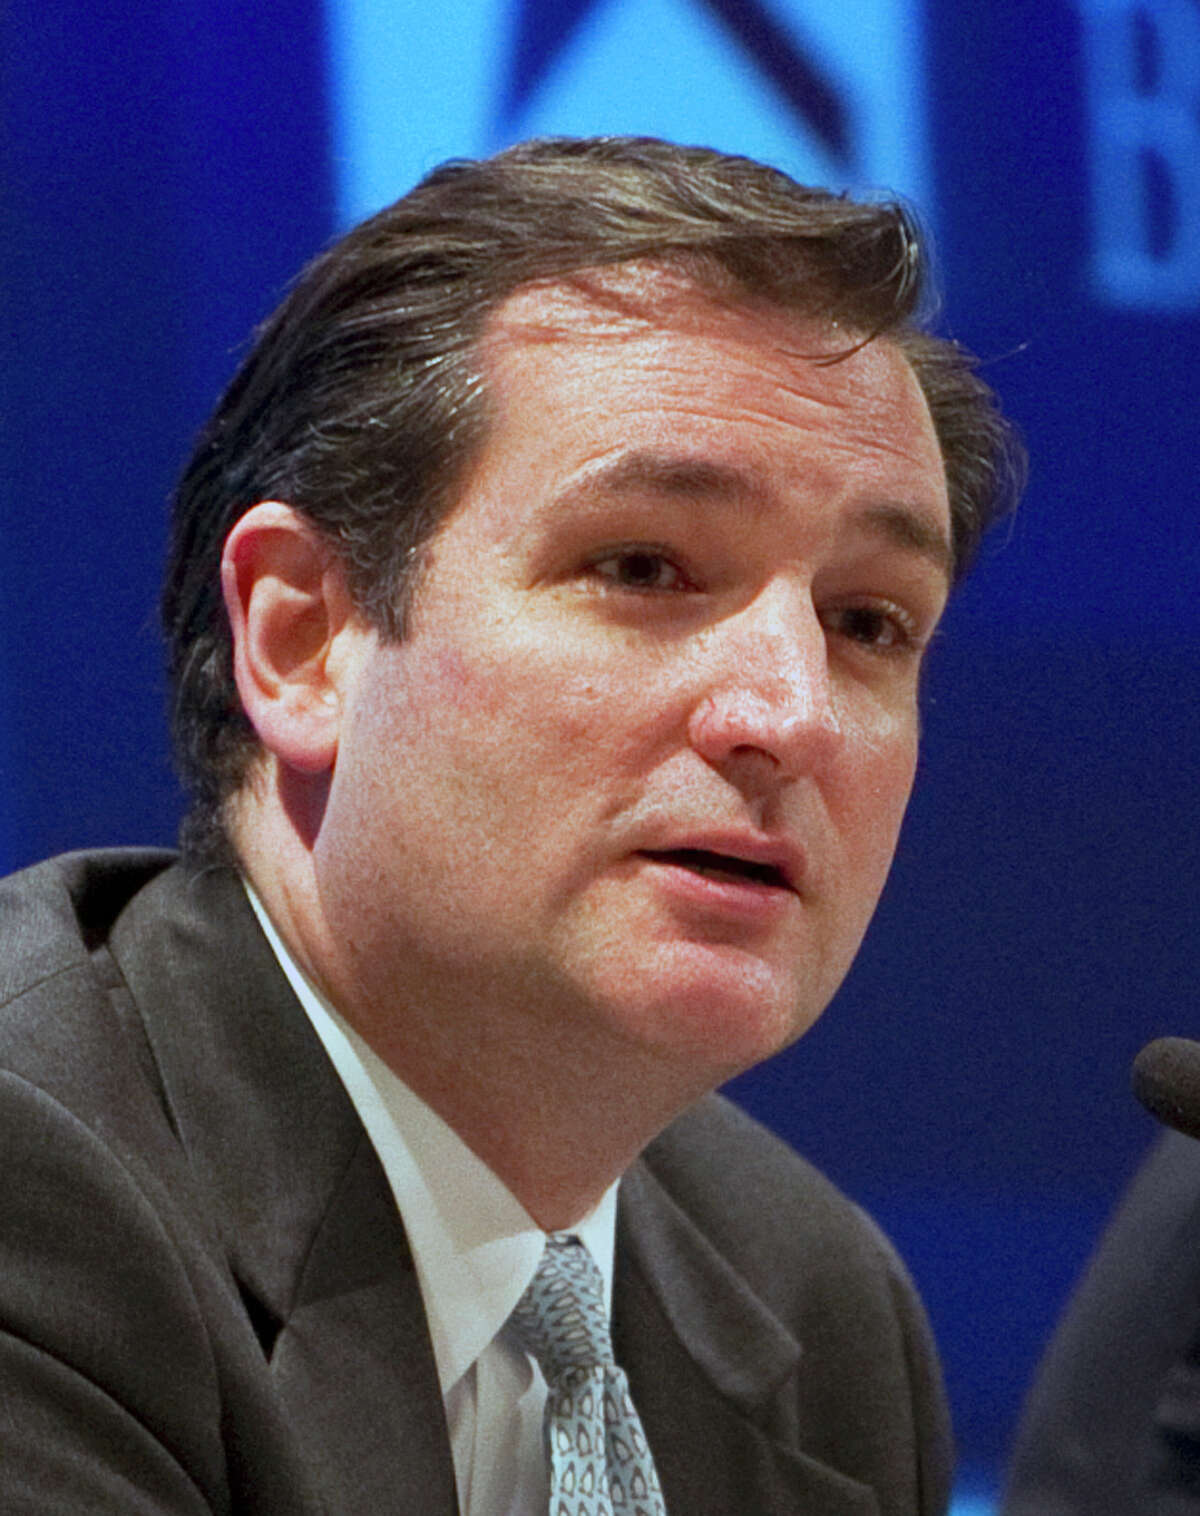 Ted Cruz, former Texas Solicitor General, is seen during a Feb. 1, 2012 debate at the Texas Association of Business 2012 Annual Conference at the AT&T Conference, in Austin, Texas.